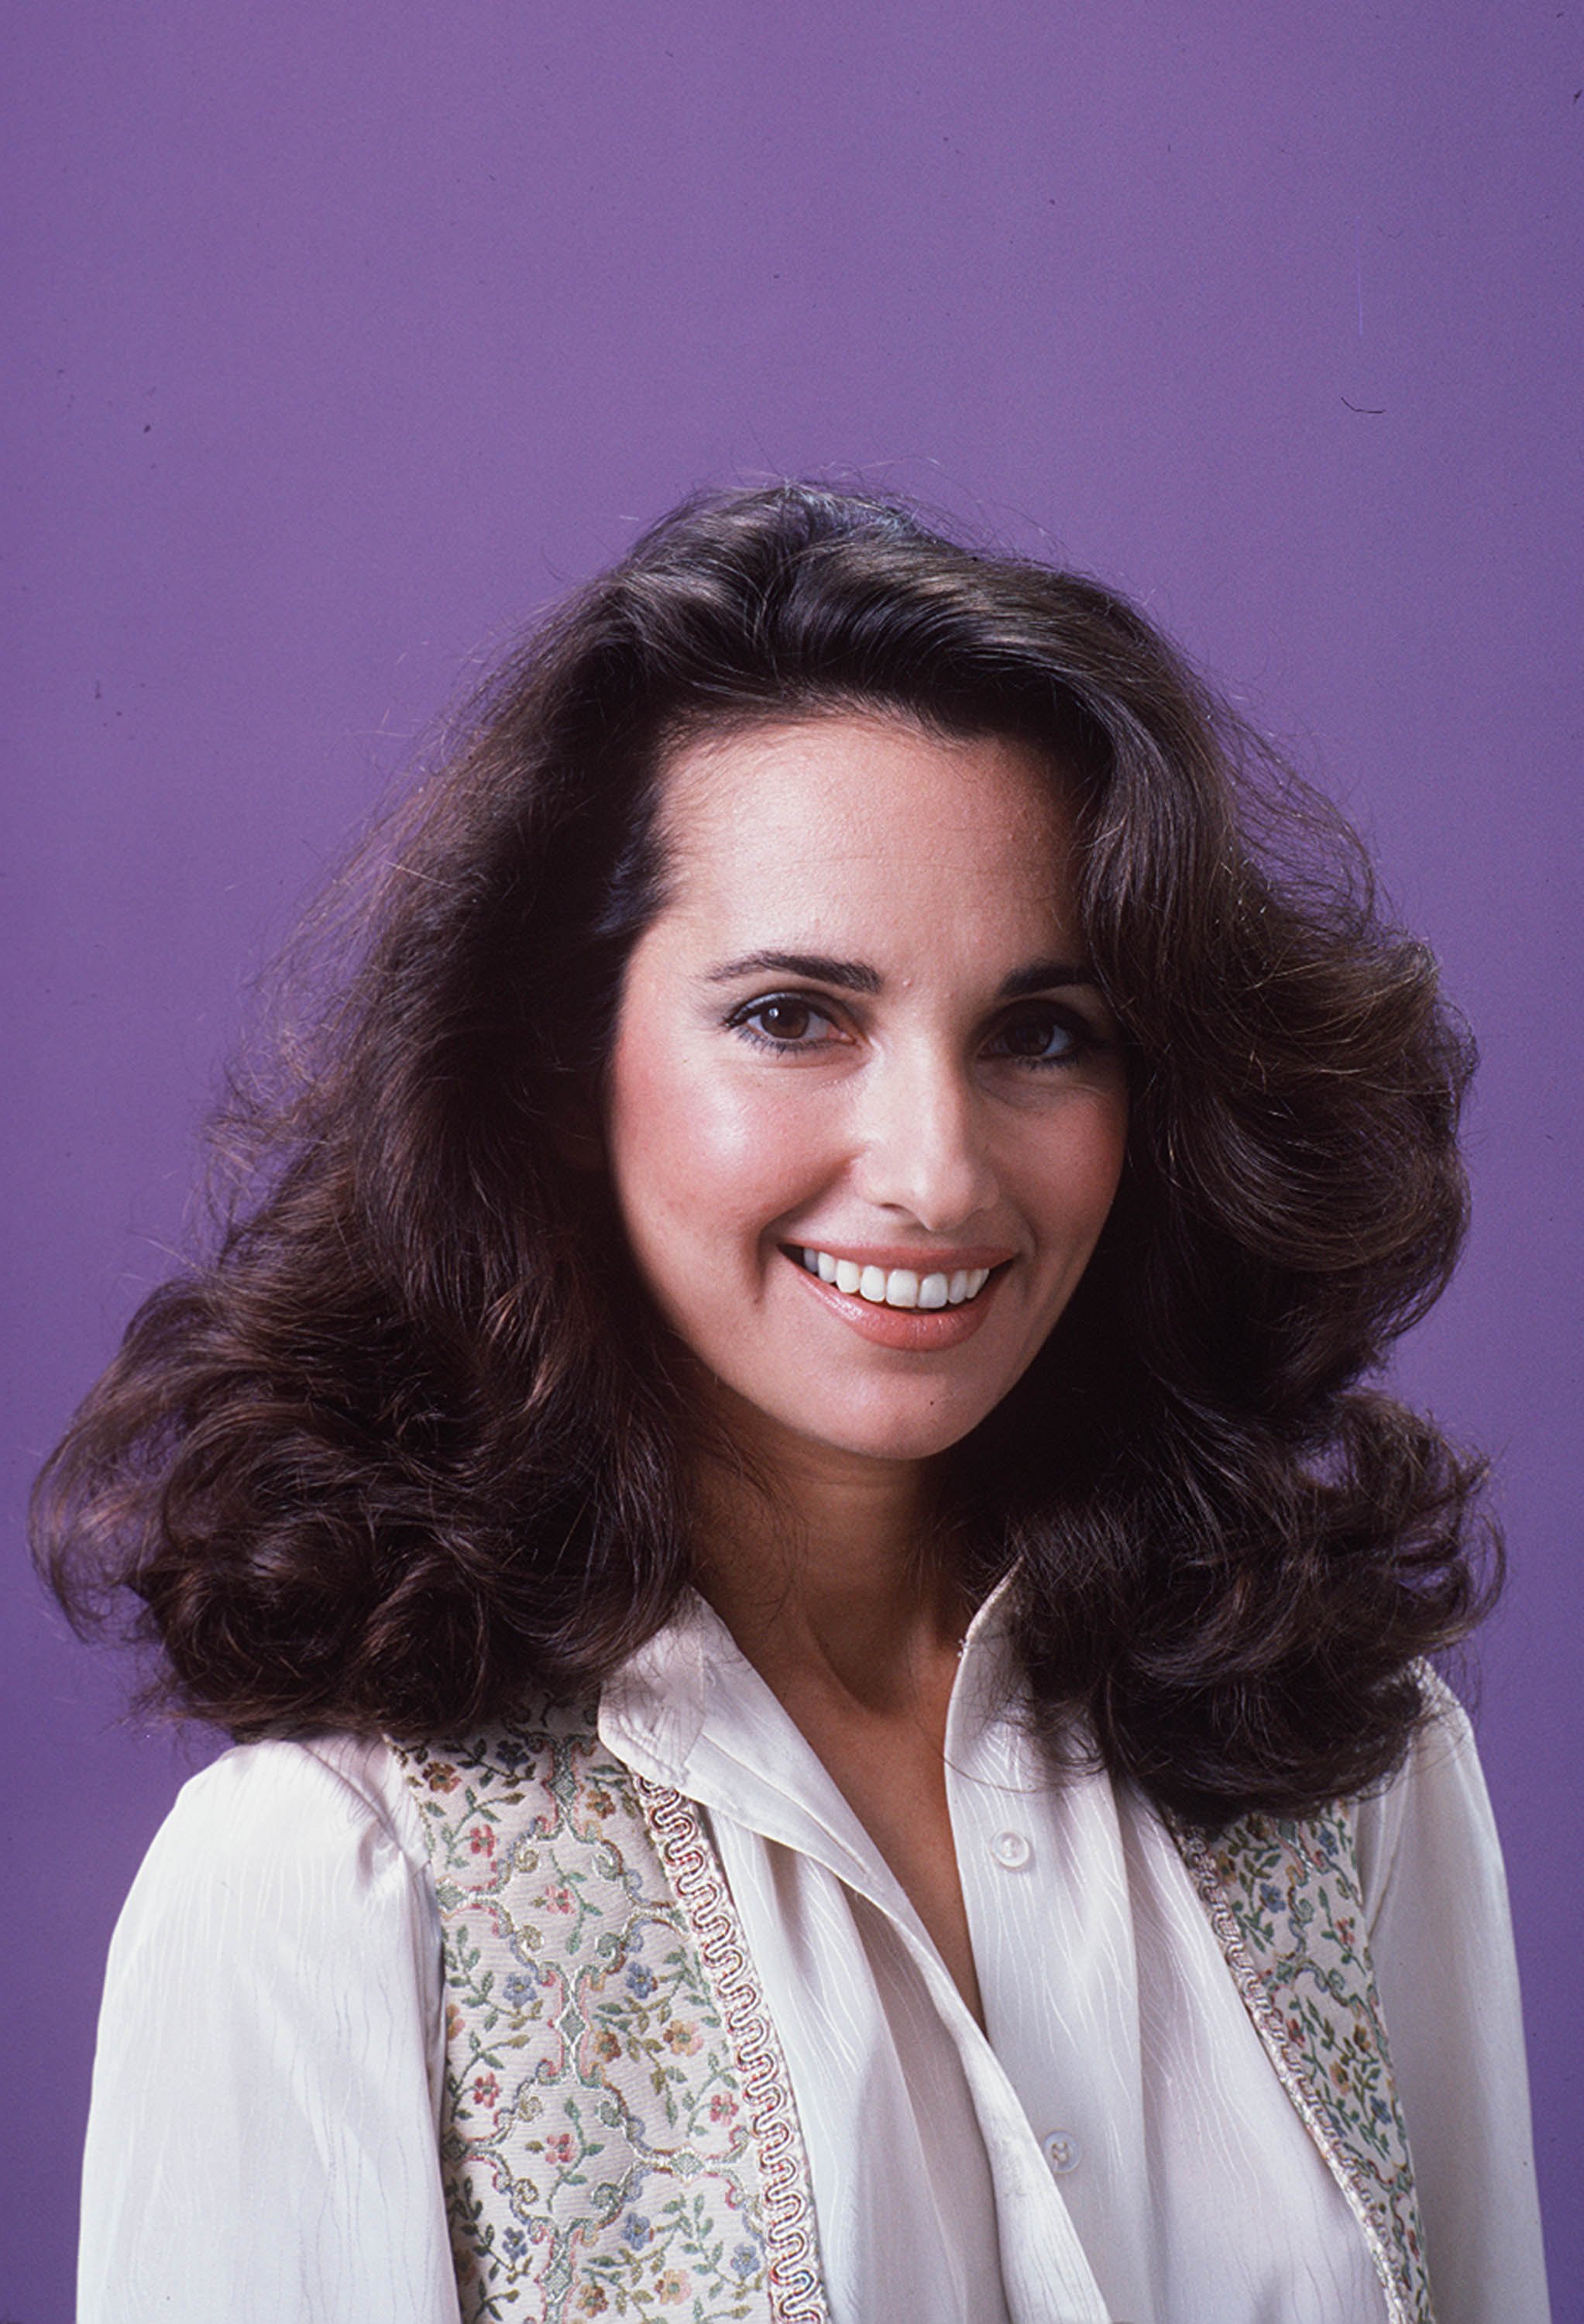 Susan Lucci plays Erica Kane on Walt Disney Television Daytime's "All My Children," on August 17, 1978. | Source: Getty Images